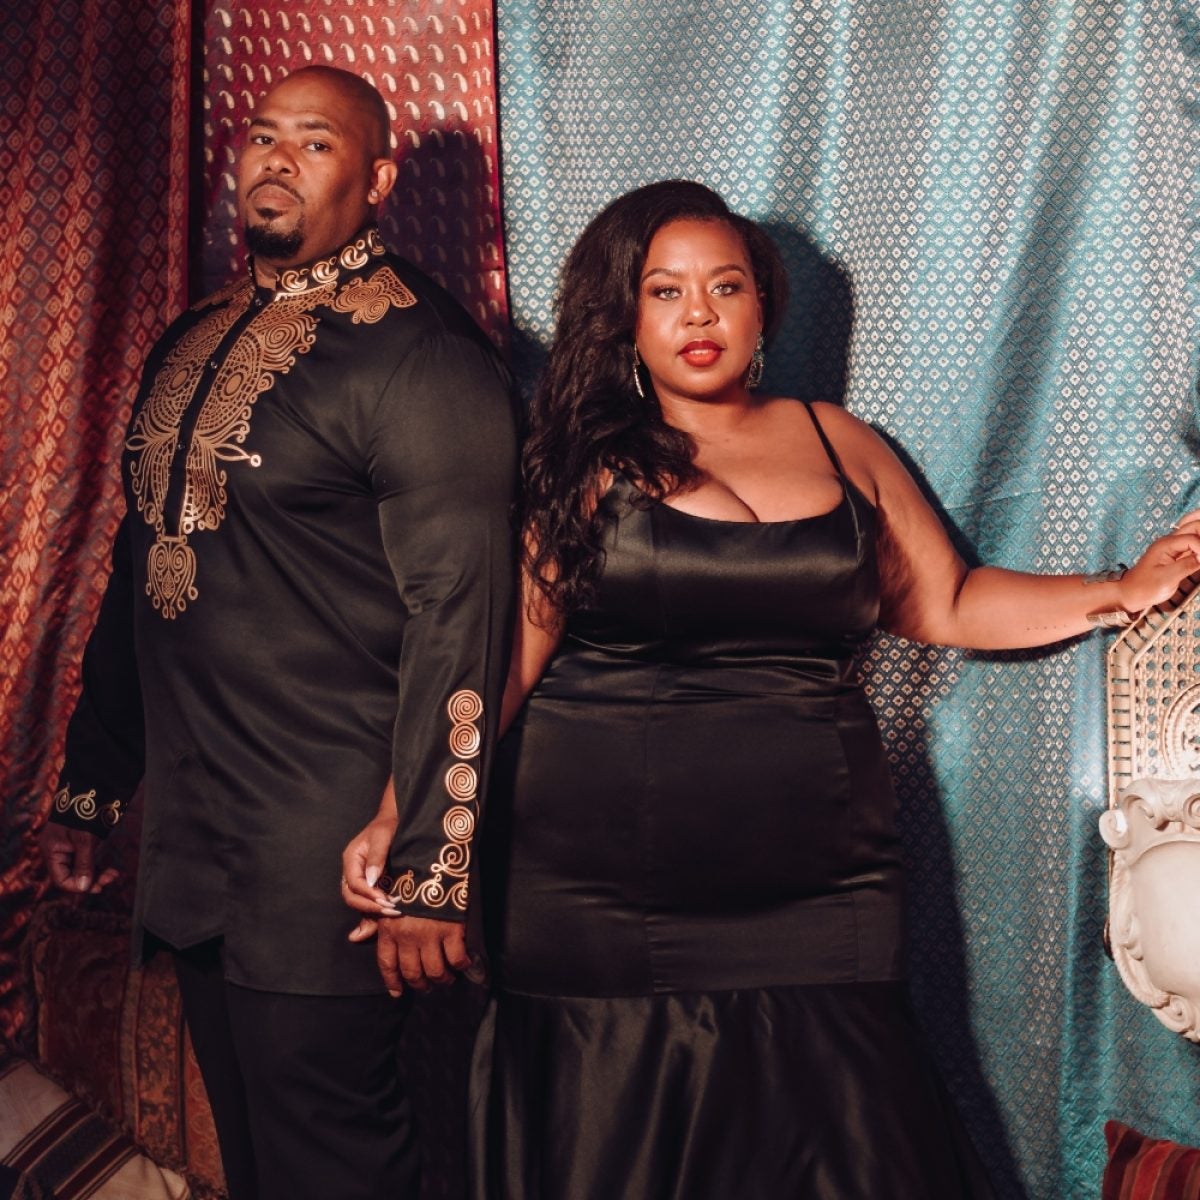 After Her Engagement Photos Were Body Shamed, Houston's First Daughter Wants More Visibility For Curvy Brides